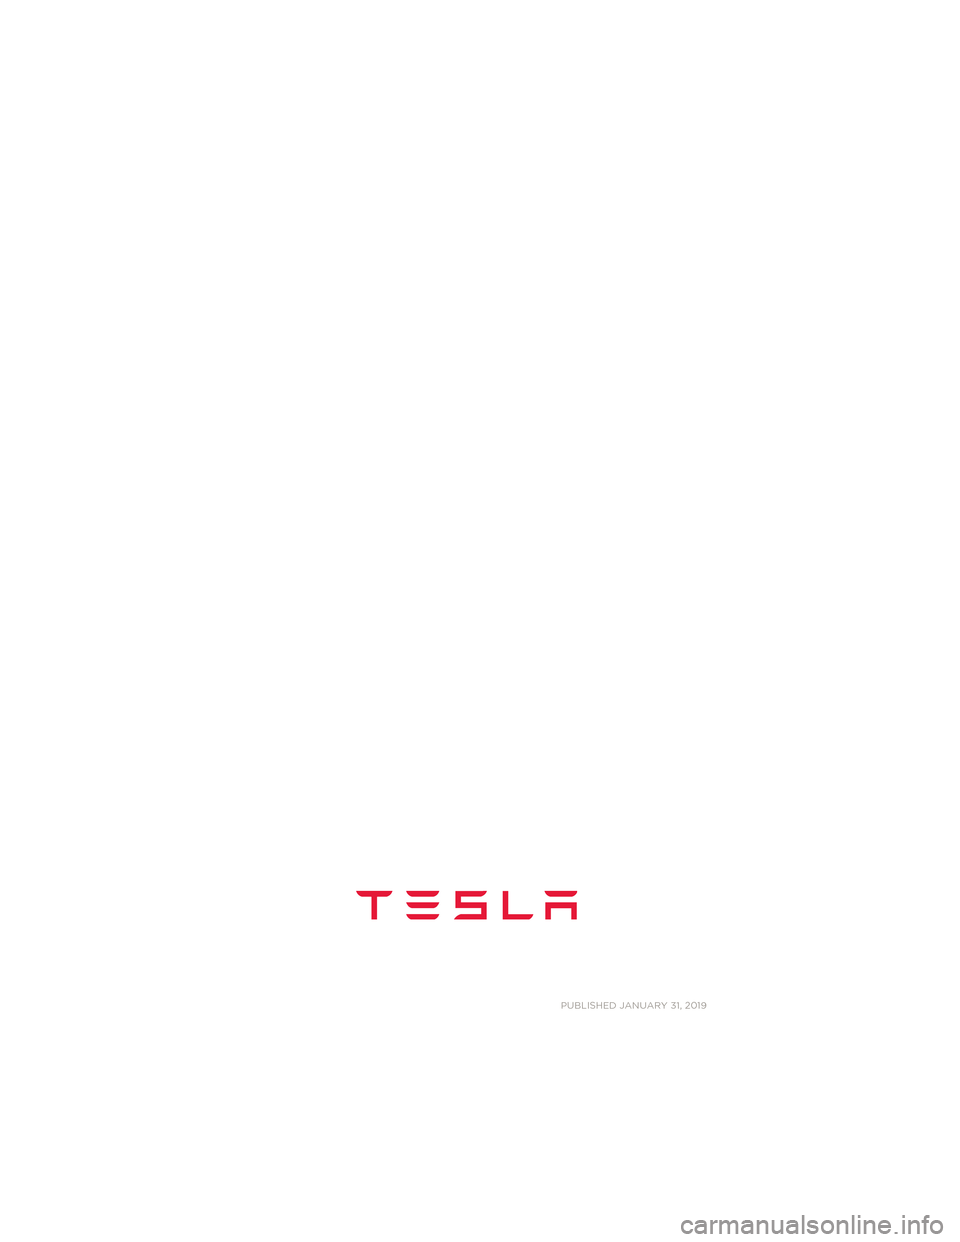 TESLA MODEL 3 2019  Betriebsanleitung (in German) PUBLISHED JANUARY 31, 2019
Model S Quick Guide - NA Rev C.book  Page
 2  Wednesday, December 18, 2013  12:40 PM 